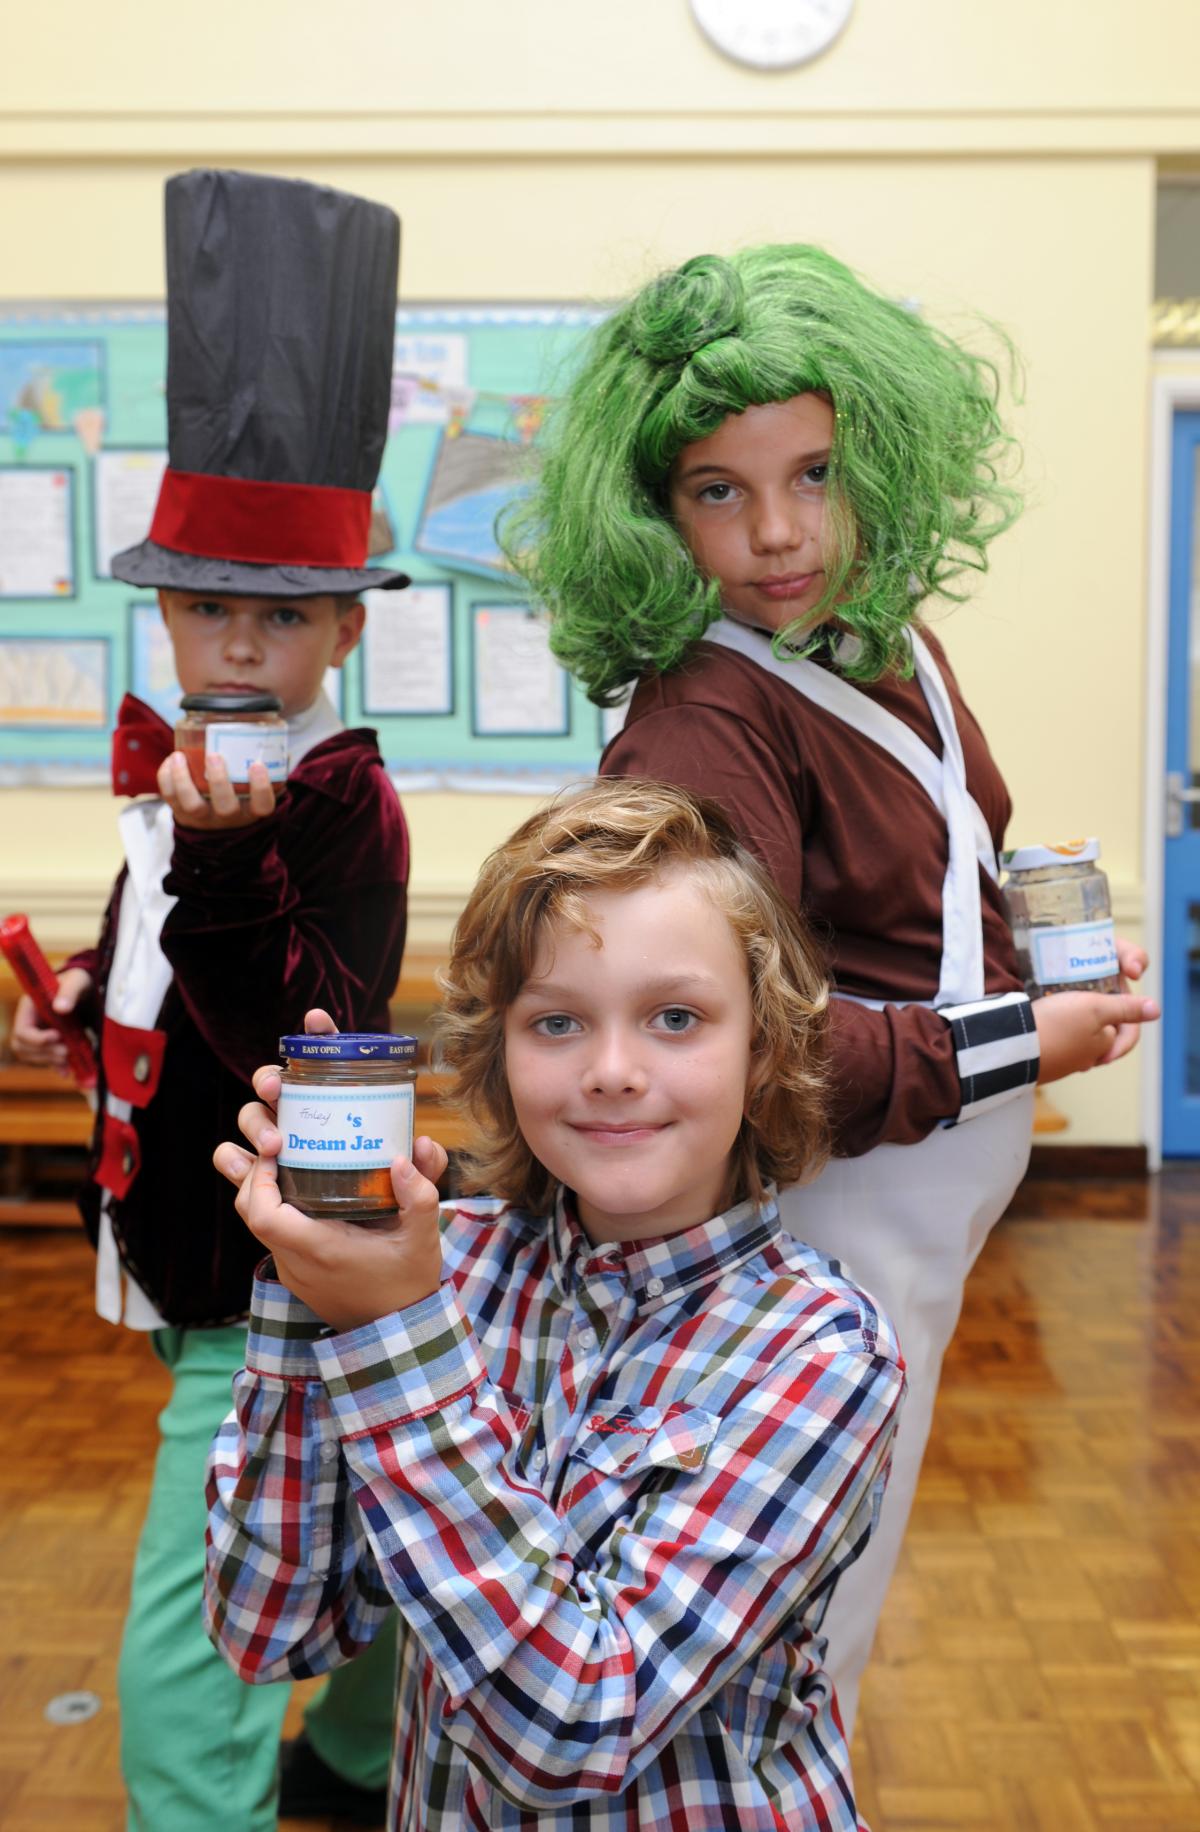 LOOMPA: Ewan Cook as Willy Wonka, Finley Perry-Livings as Charlie and Jessica Harris as an Oompa Loompa from Charlie and the Chocolate Factory